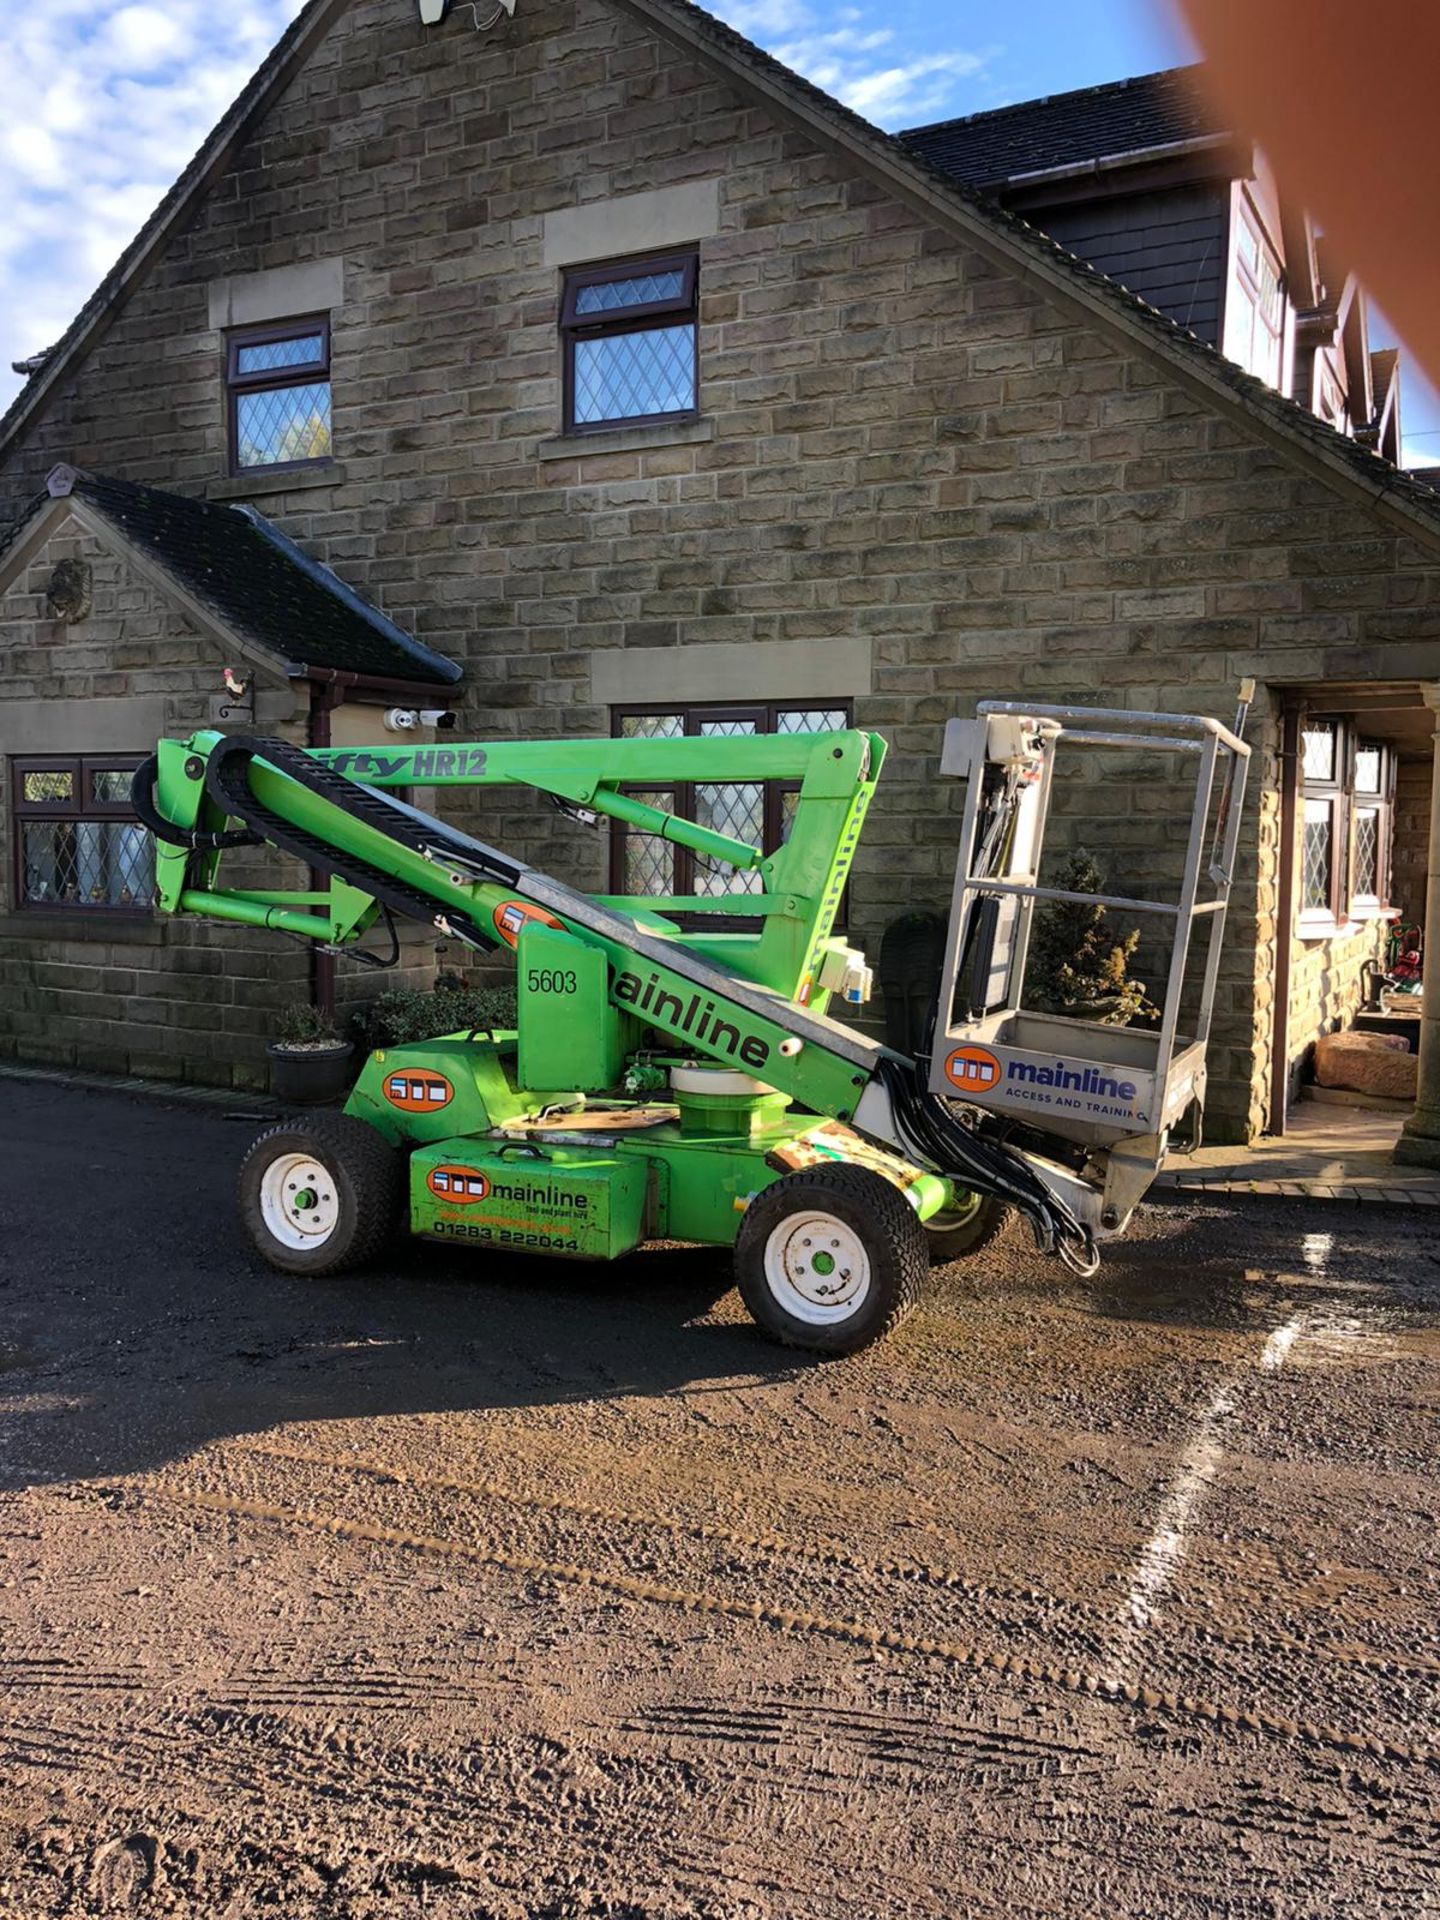 NIFTY NR12 NDE BOOM LIFT SCISSOR LIFT, YEAR 2007, RUNS, WORKS, LIFTS, VERY GOOD BATTERY *PLUS VAT* - Image 11 of 11